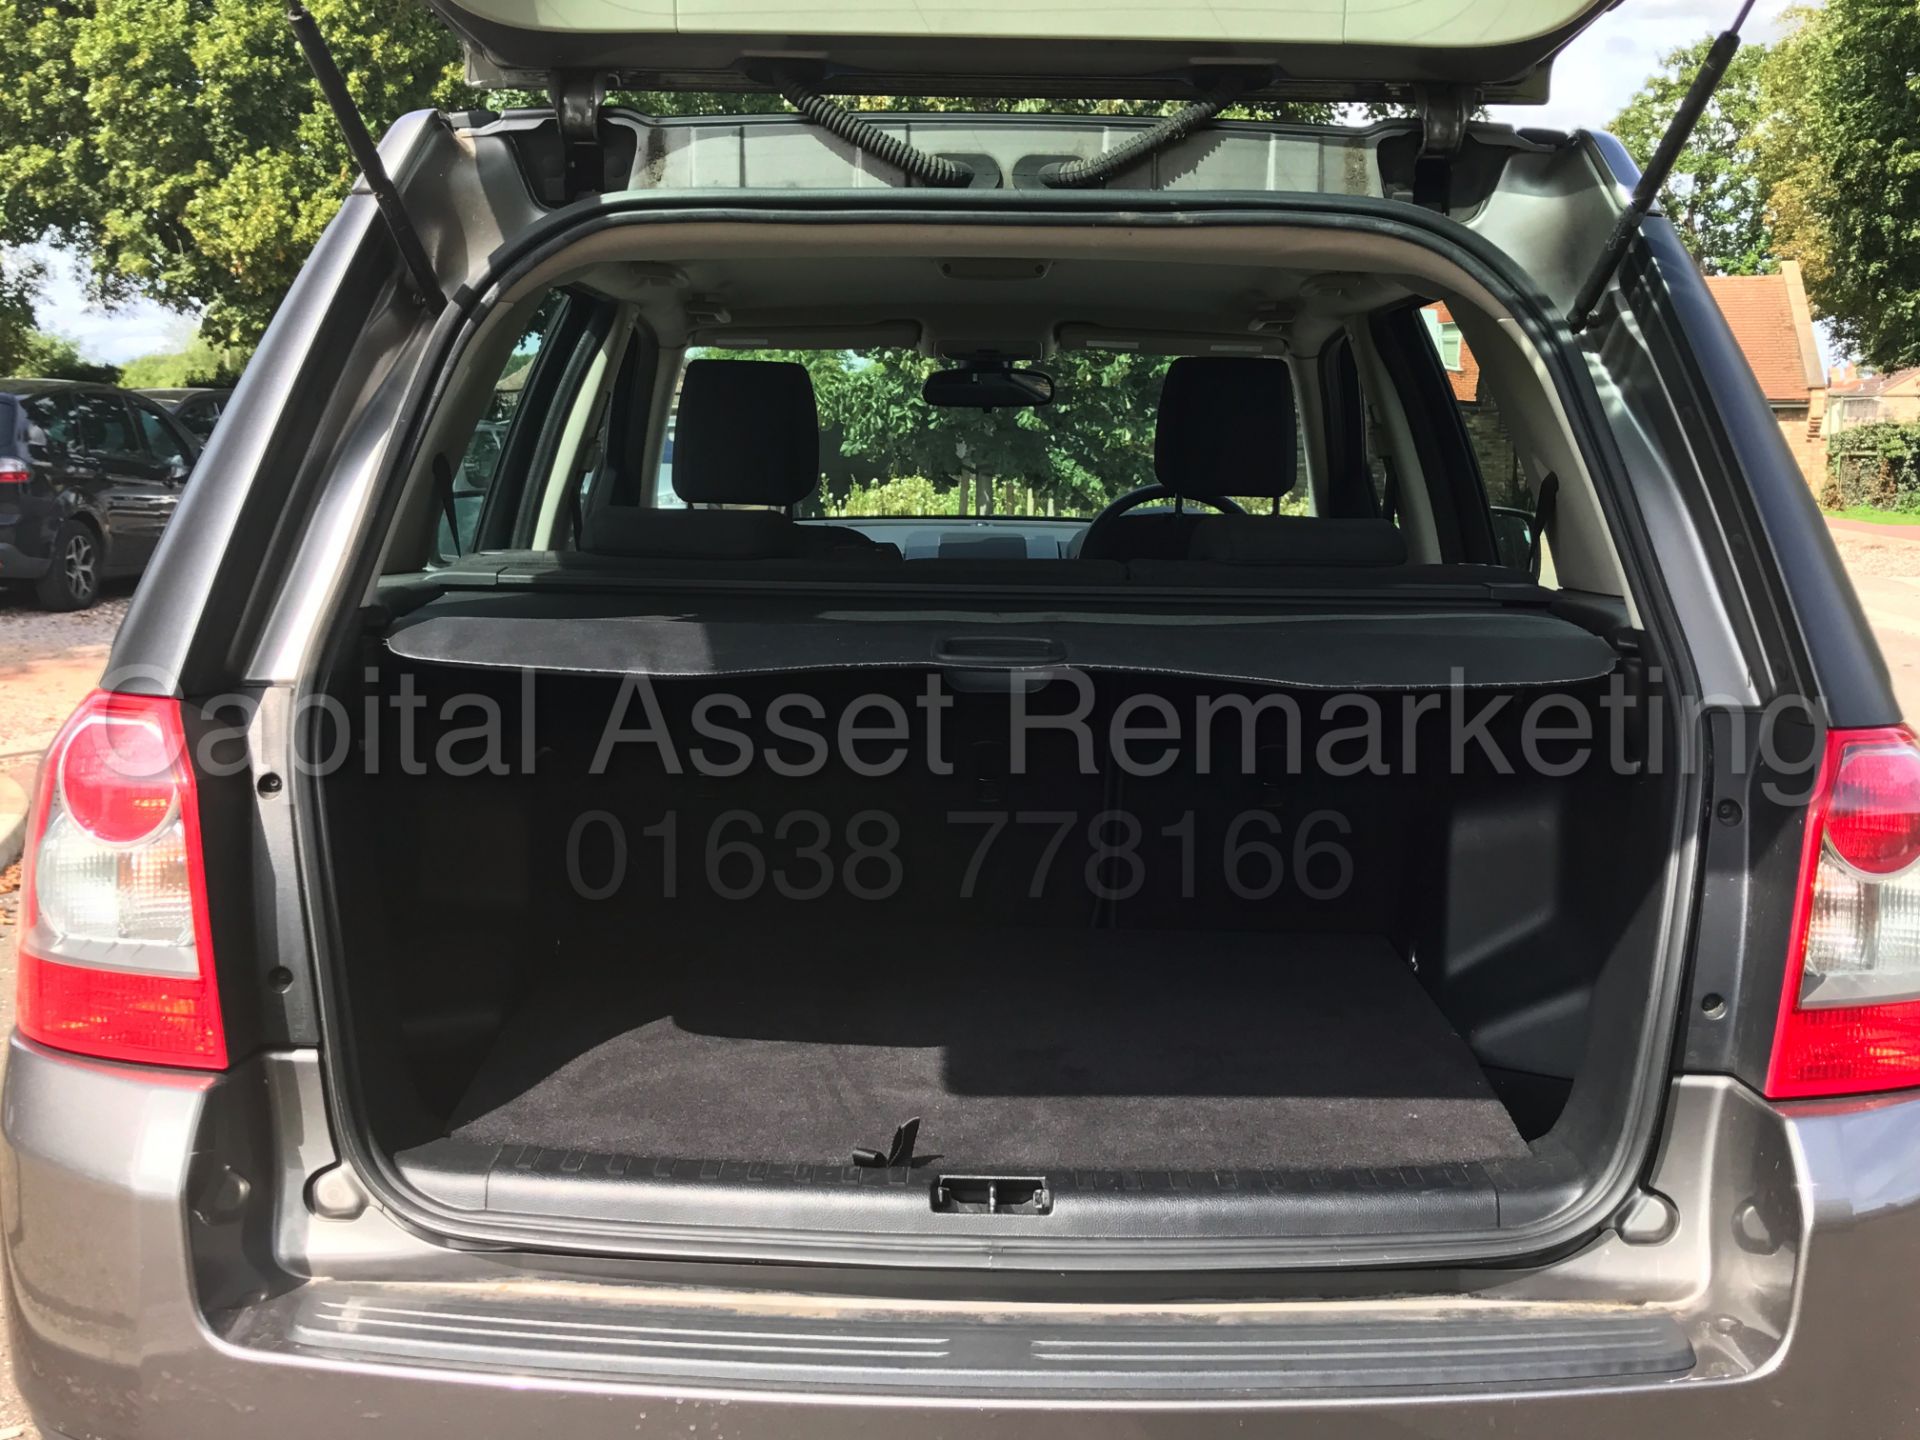 LAND ROVER FREELANDER (2007) '2.2 TD4 - AUTOMATIC - 161 BHP' **AIR CON** (NO VAT - SAVE 20%) - Image 17 of 28